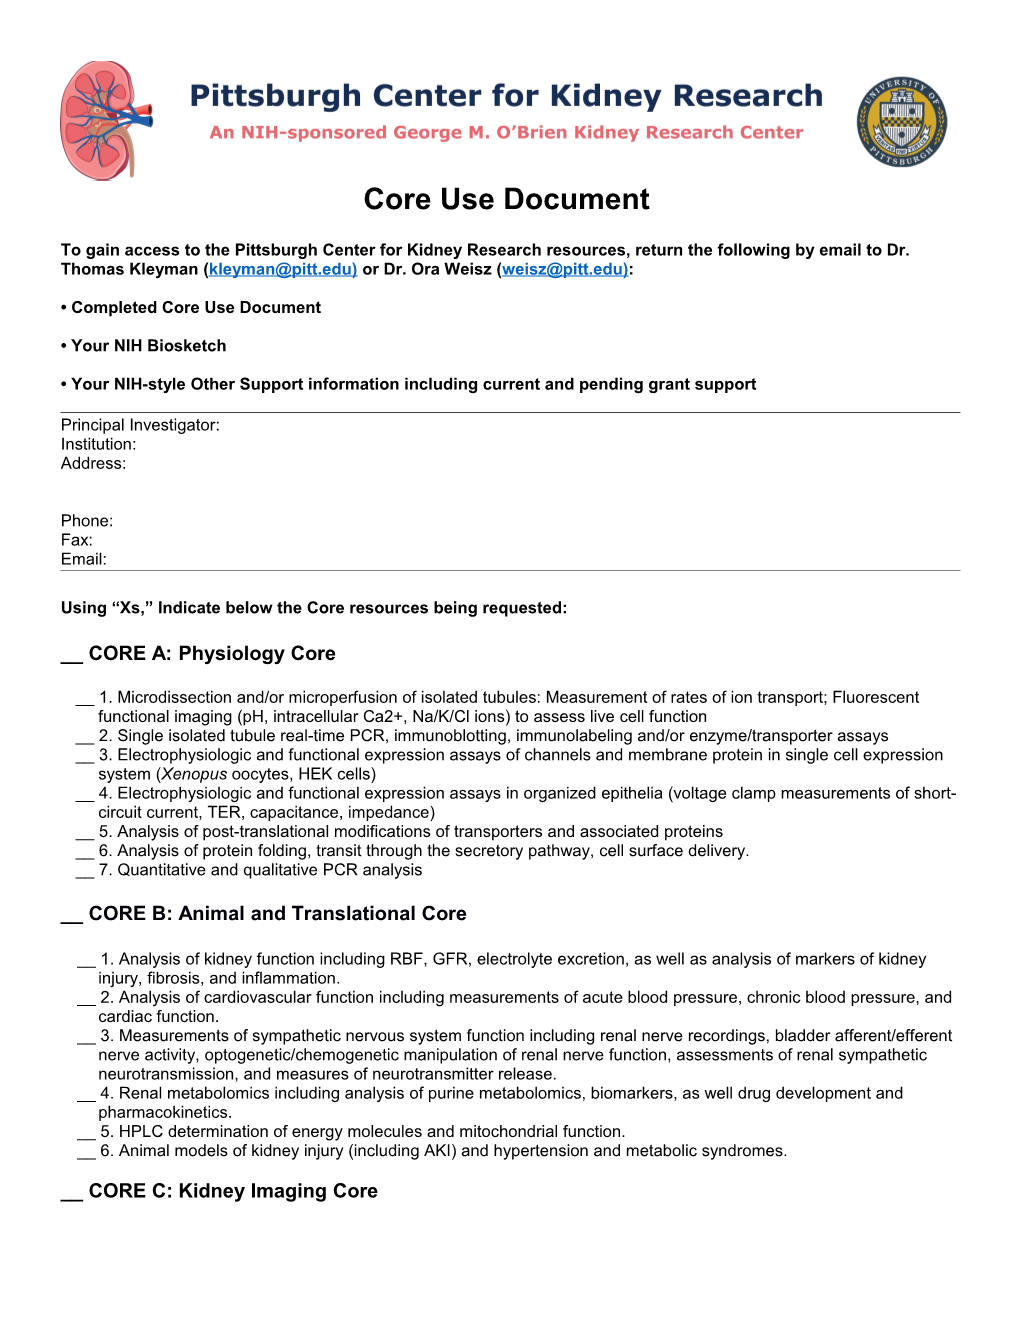 Completed Core Use Document